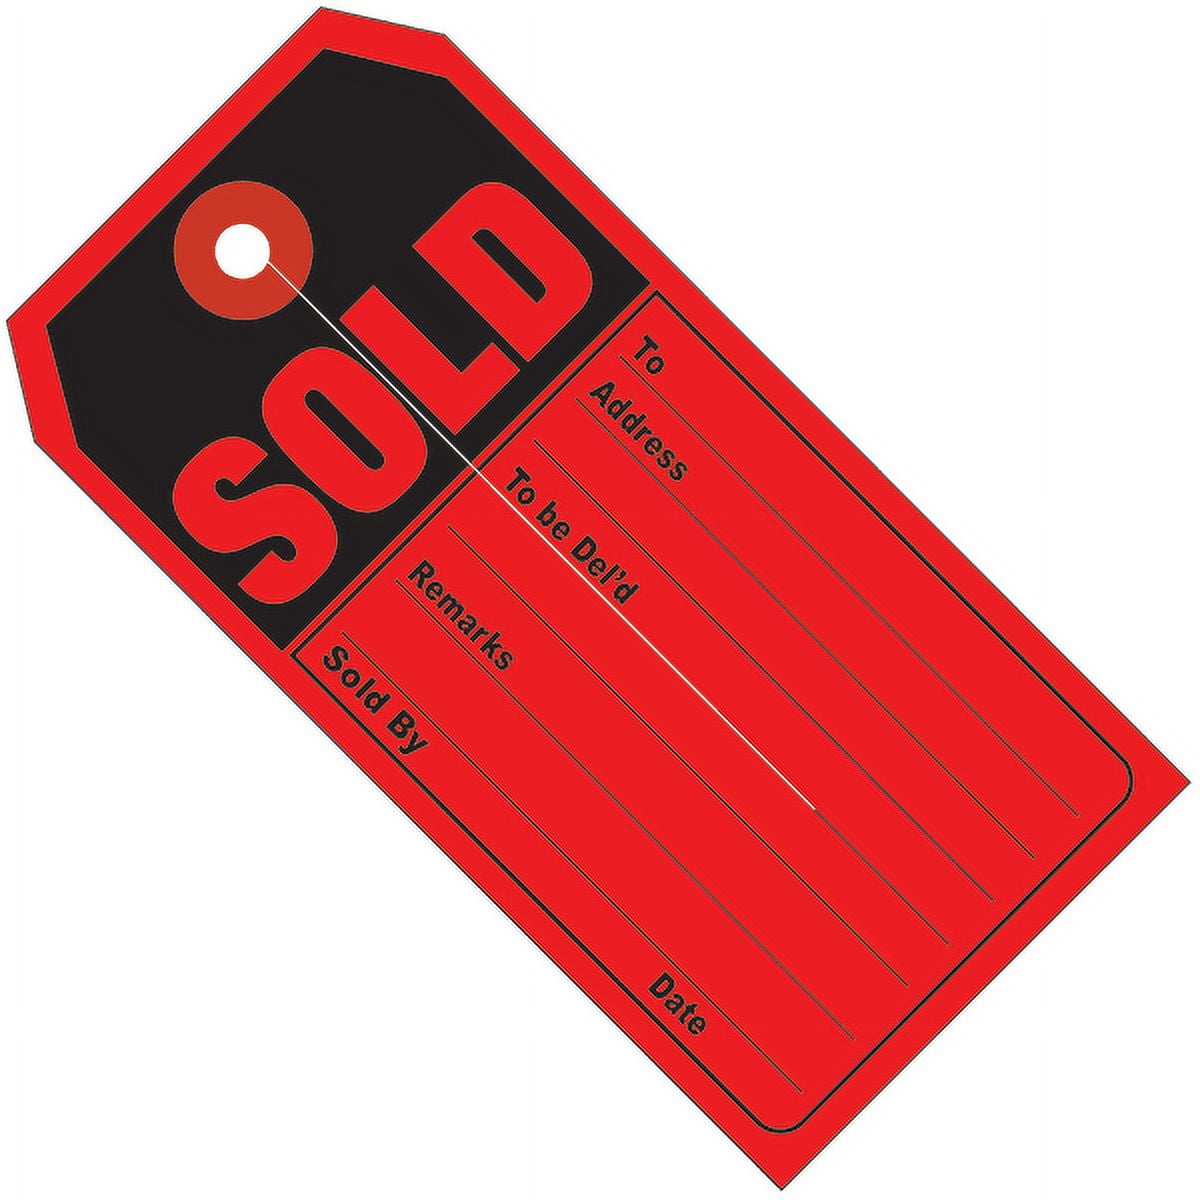 G26010 4.75 X 2.38 In. Sold Retail Tags, Red & Black - Case Of 500